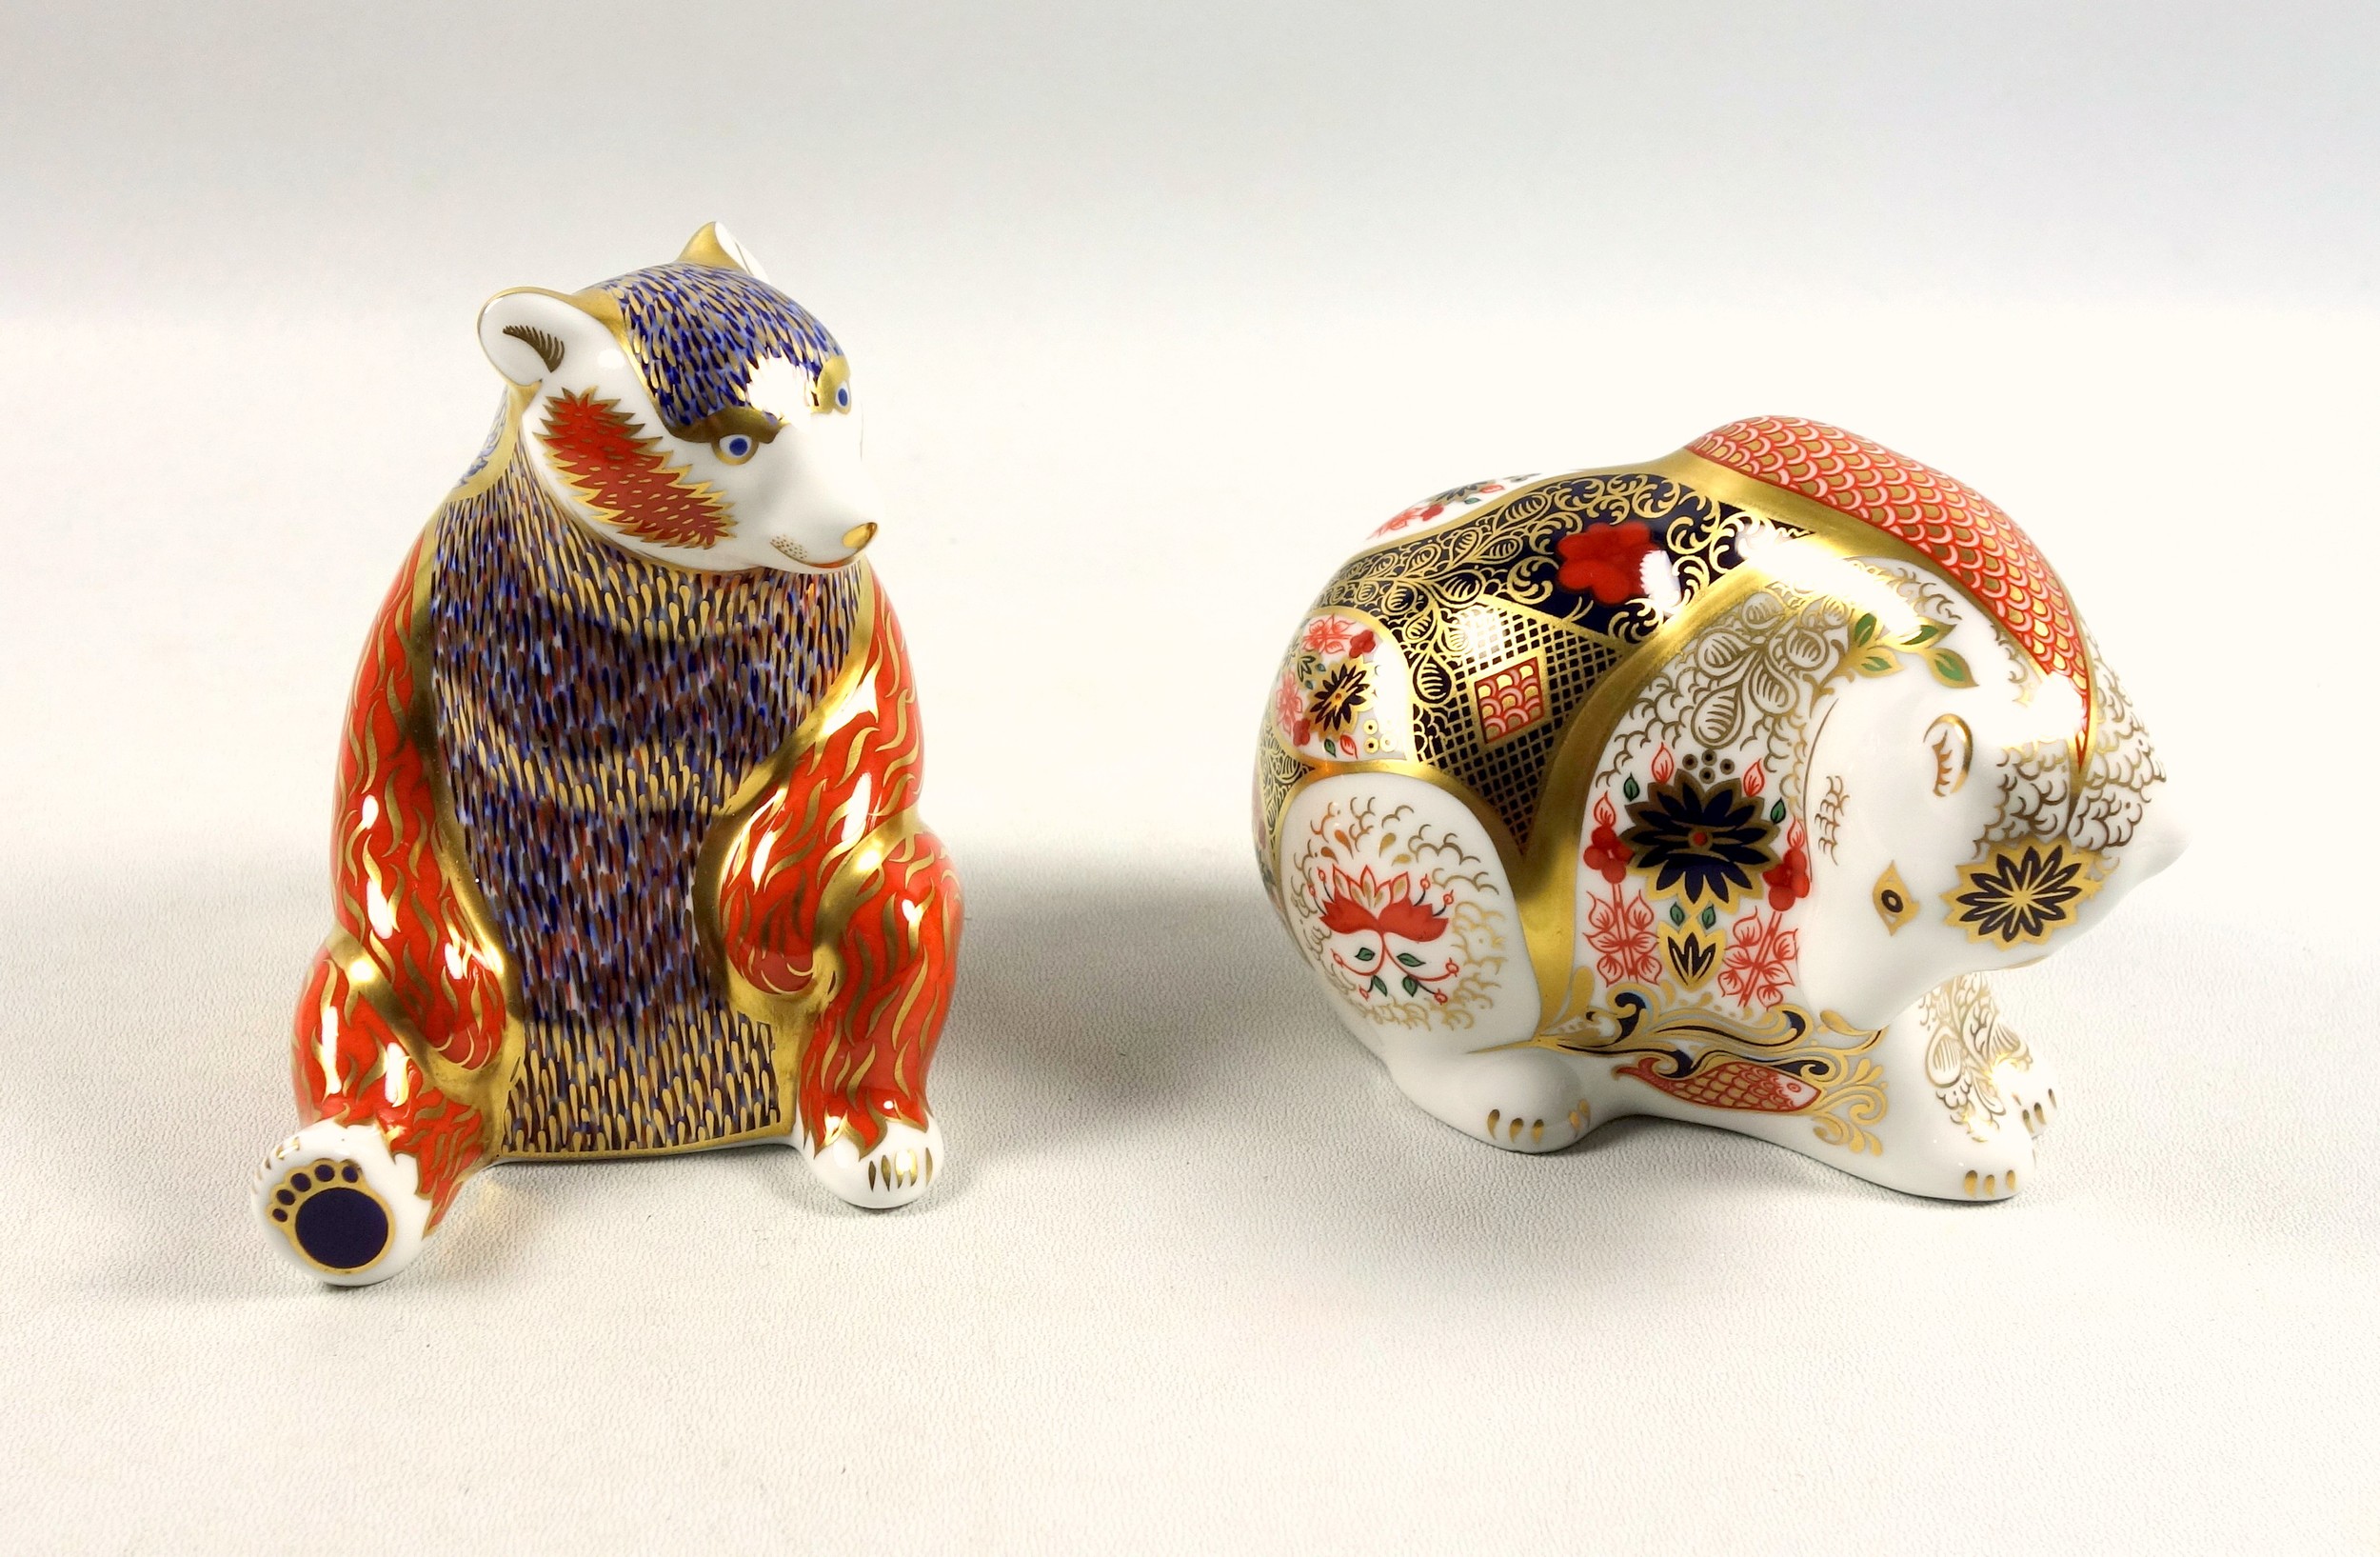 Royal Crown Derby "Honeybear" paperweight, H.10cm and an Imari pattern "Rocky Mountain bear", W. - Image 2 of 5